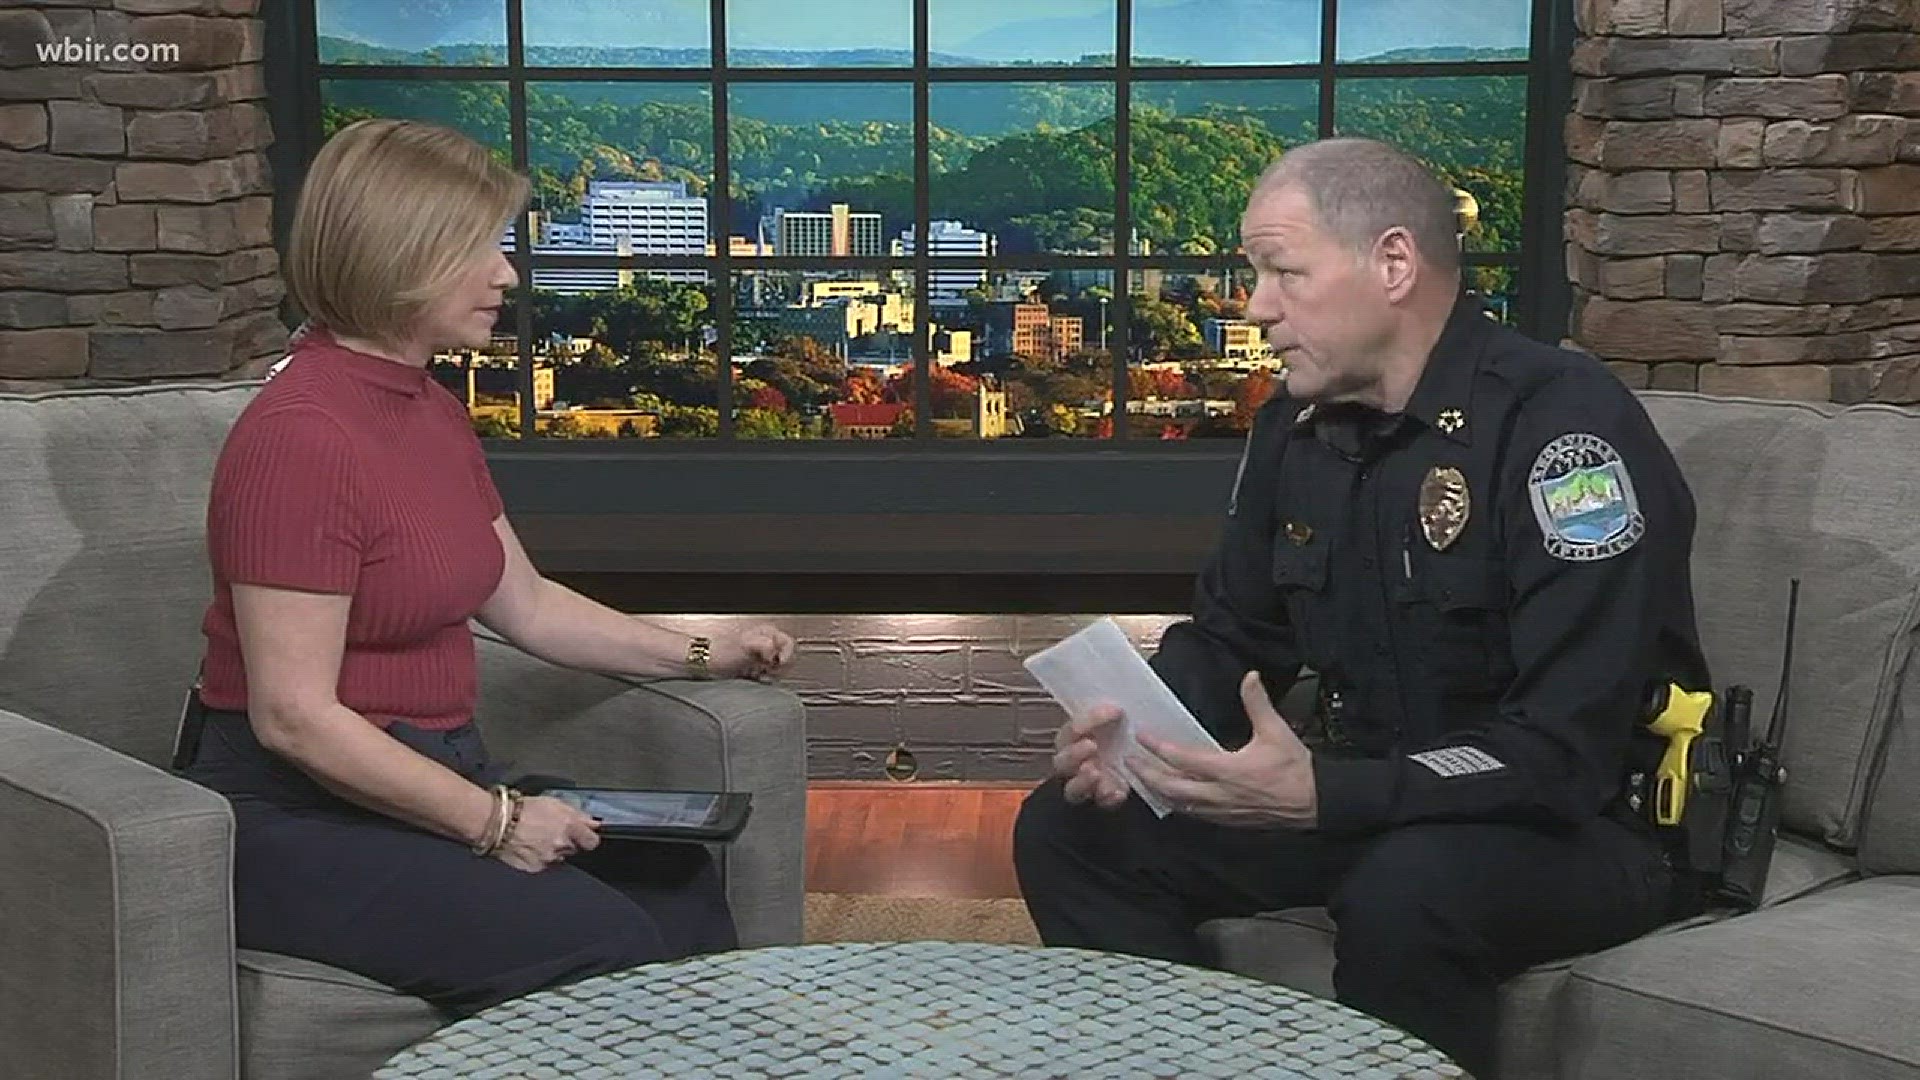 Knoxville police chief David Rausch says Officer Jay Williams is out of the hospital and in great spirits after he was injured in a shooting. The suspect fired 5 shots at Williams during a traffic stop. They are still looking for the suspect, but the comm